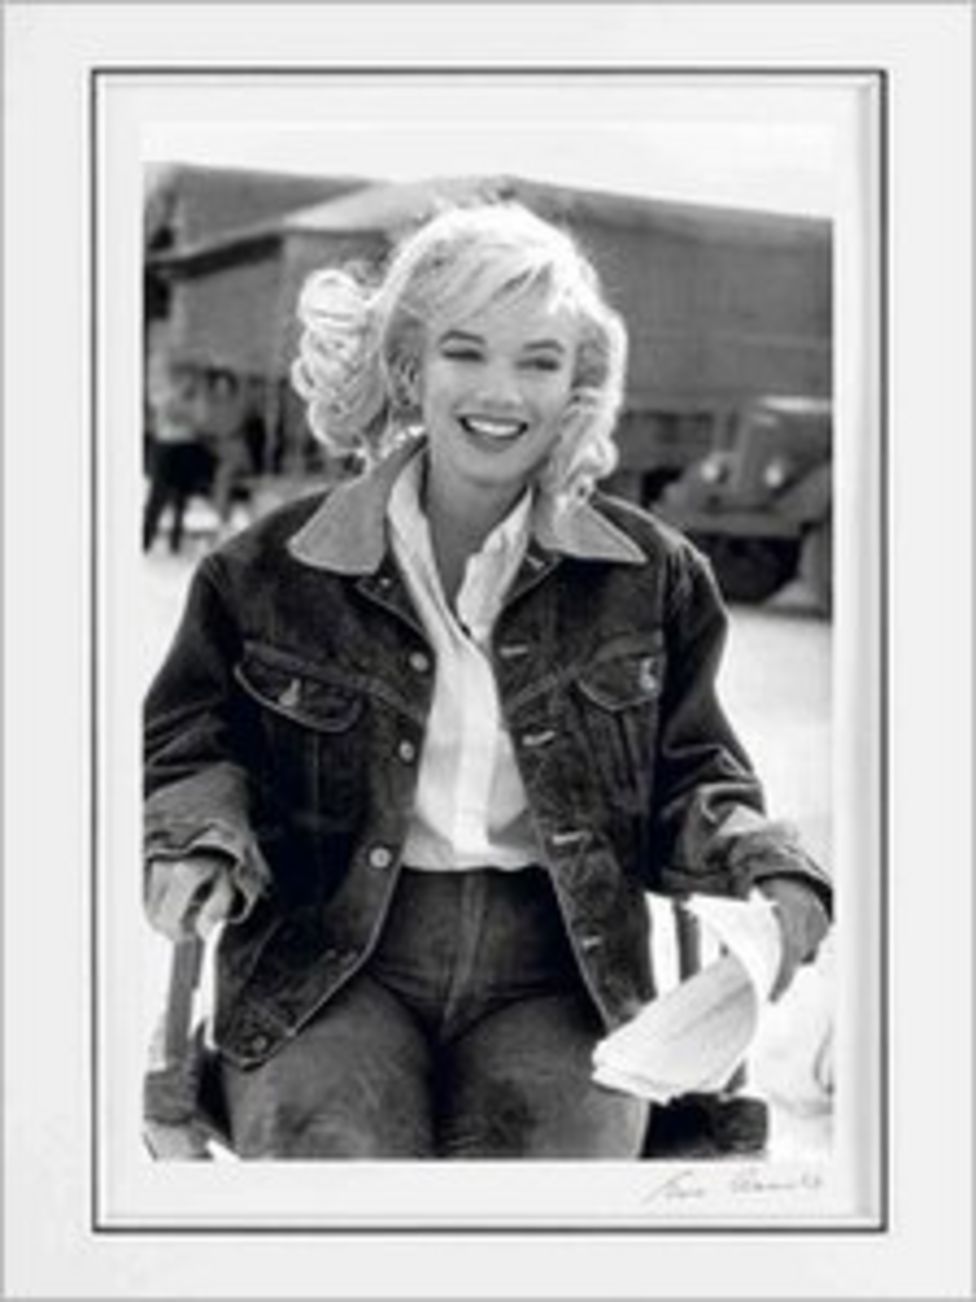 Marilyn Monroe prints go on show in Bournemouth - BBC News